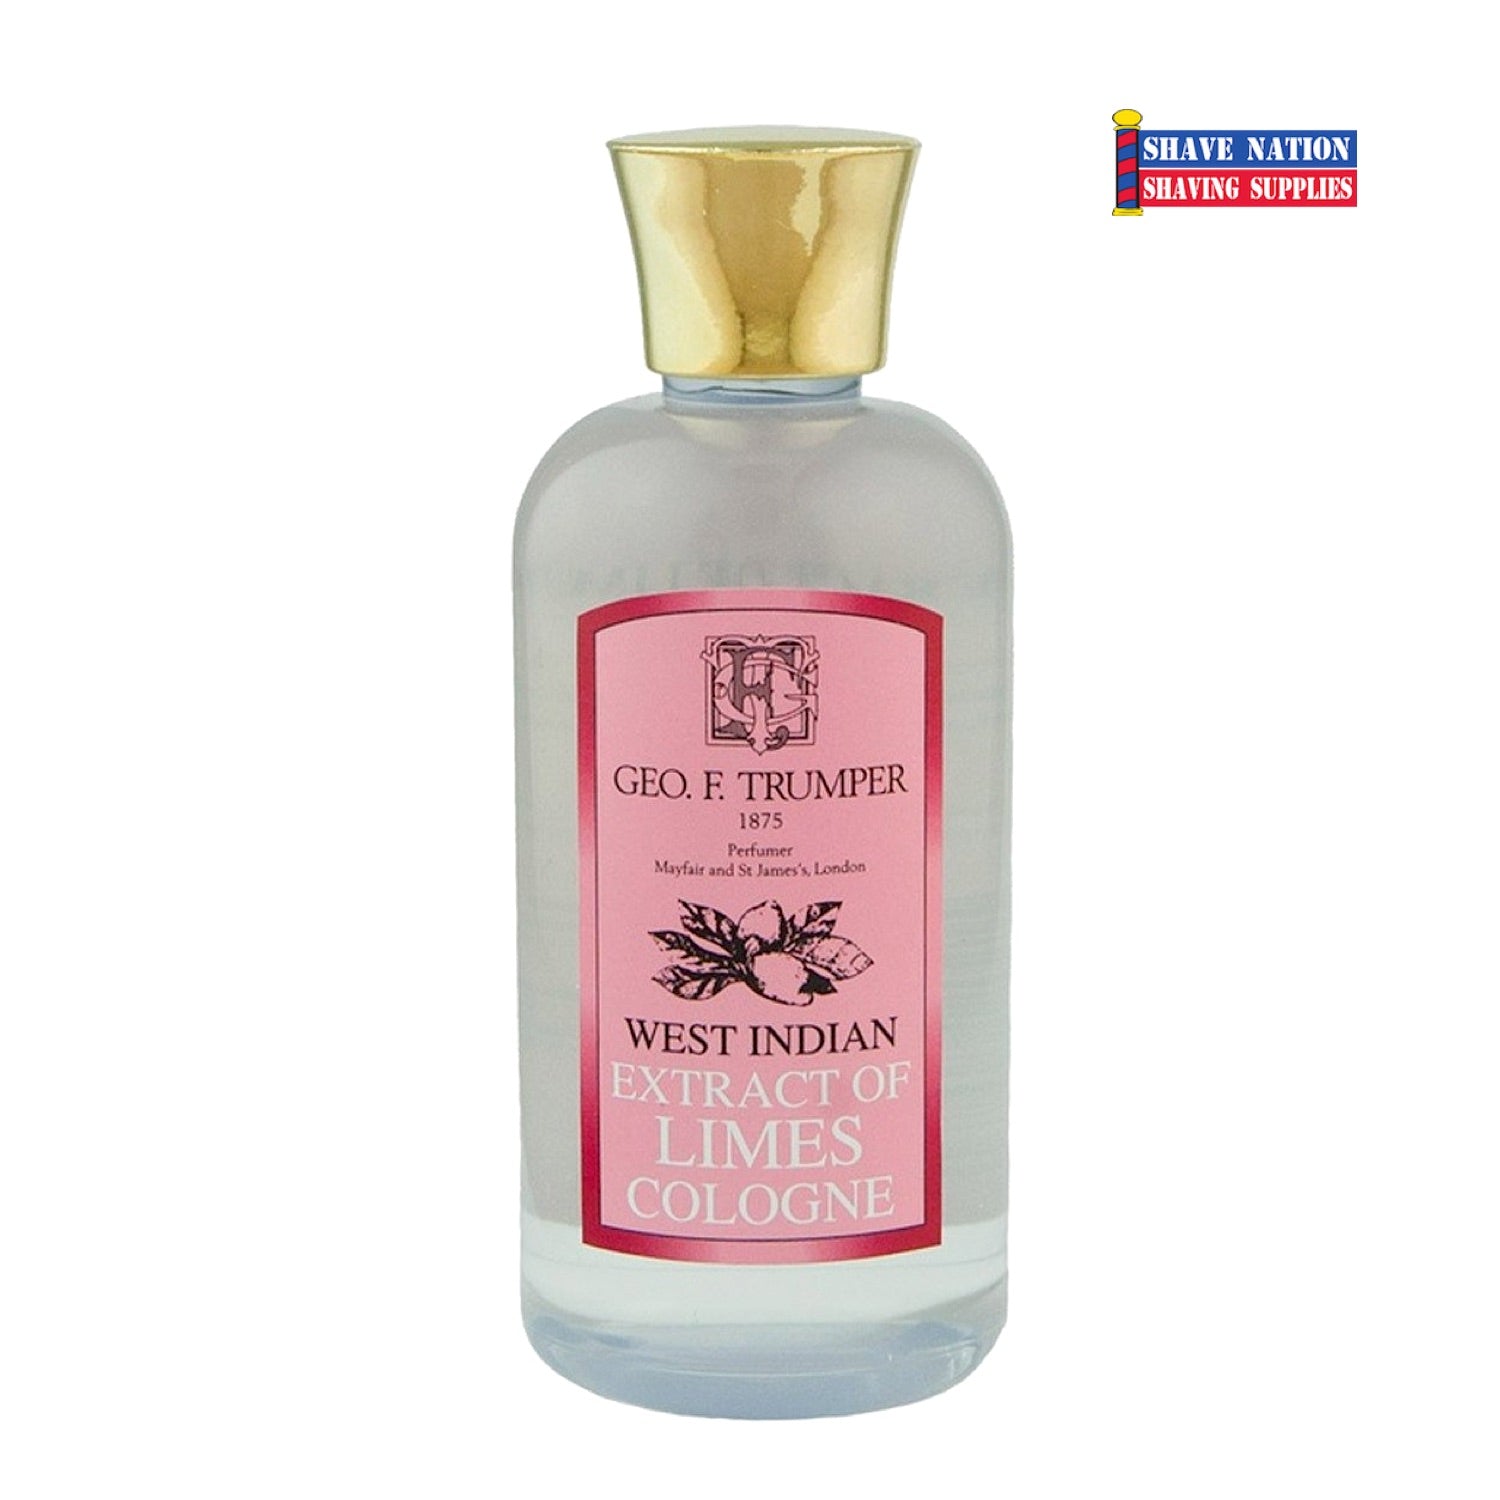 Geo F Trumper Cologne Extract of Limes 100ml